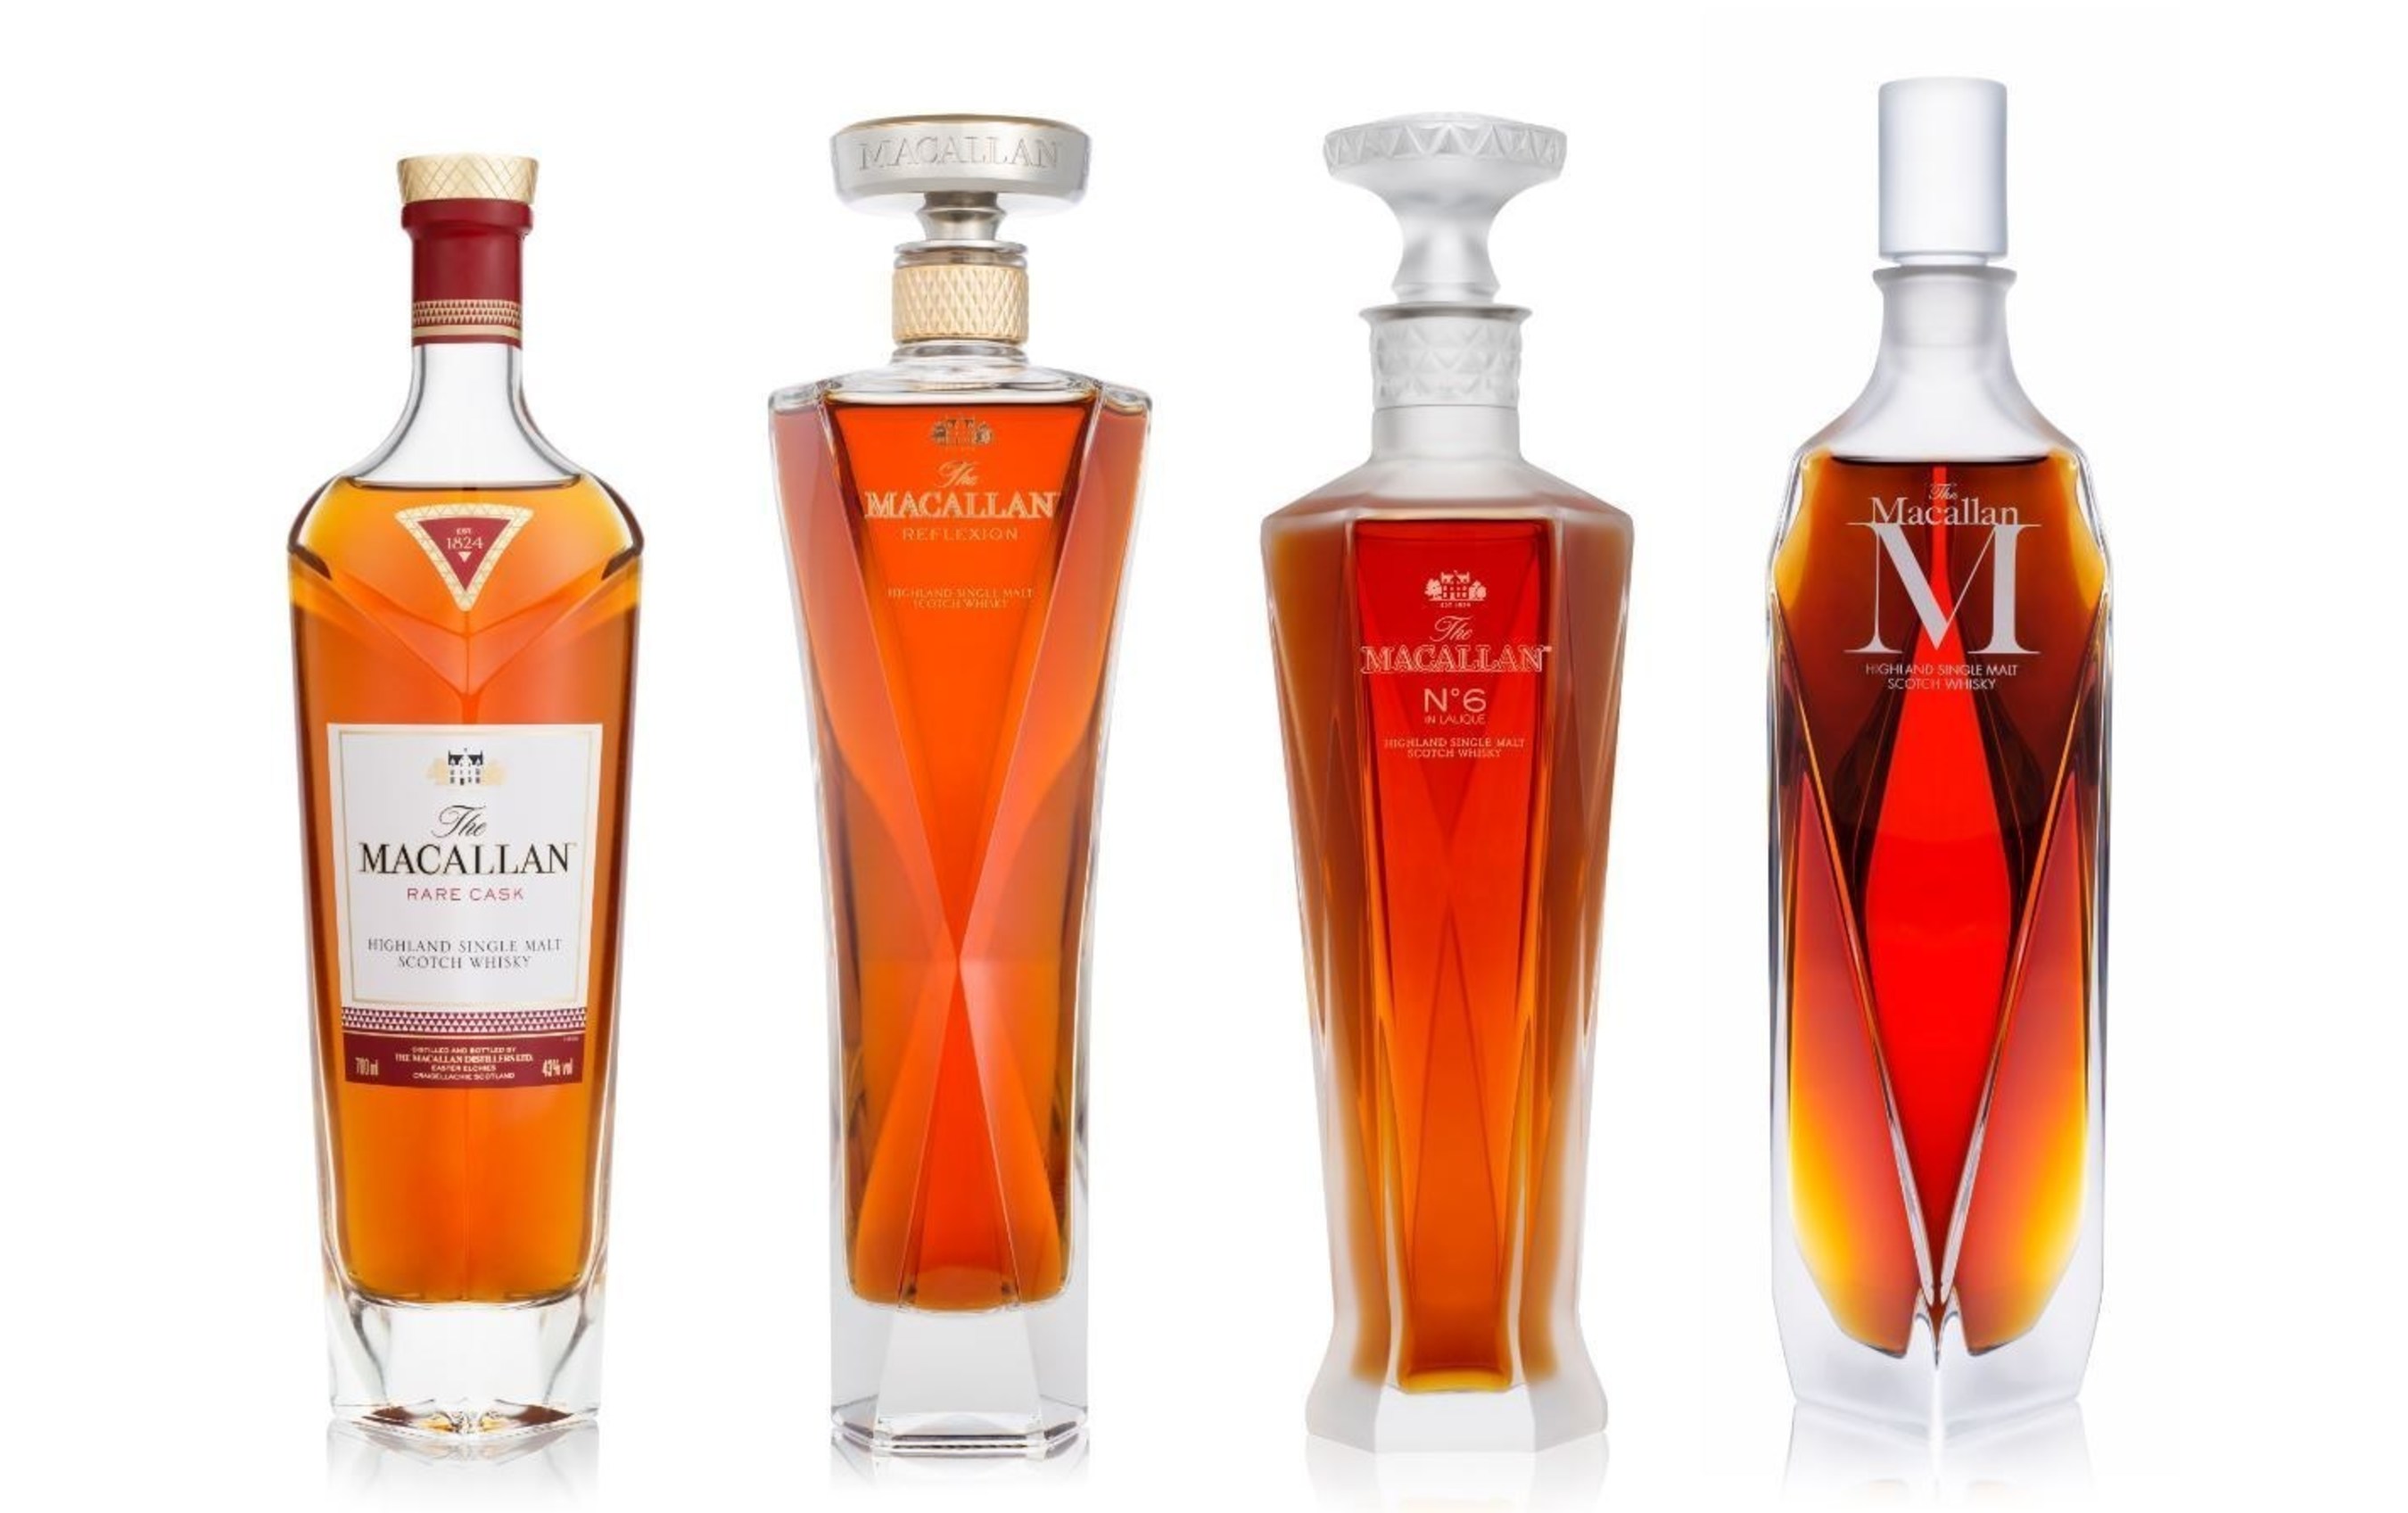 The Macallan Completes 1824 Masters Series With The Release Of Reflexion And No 6